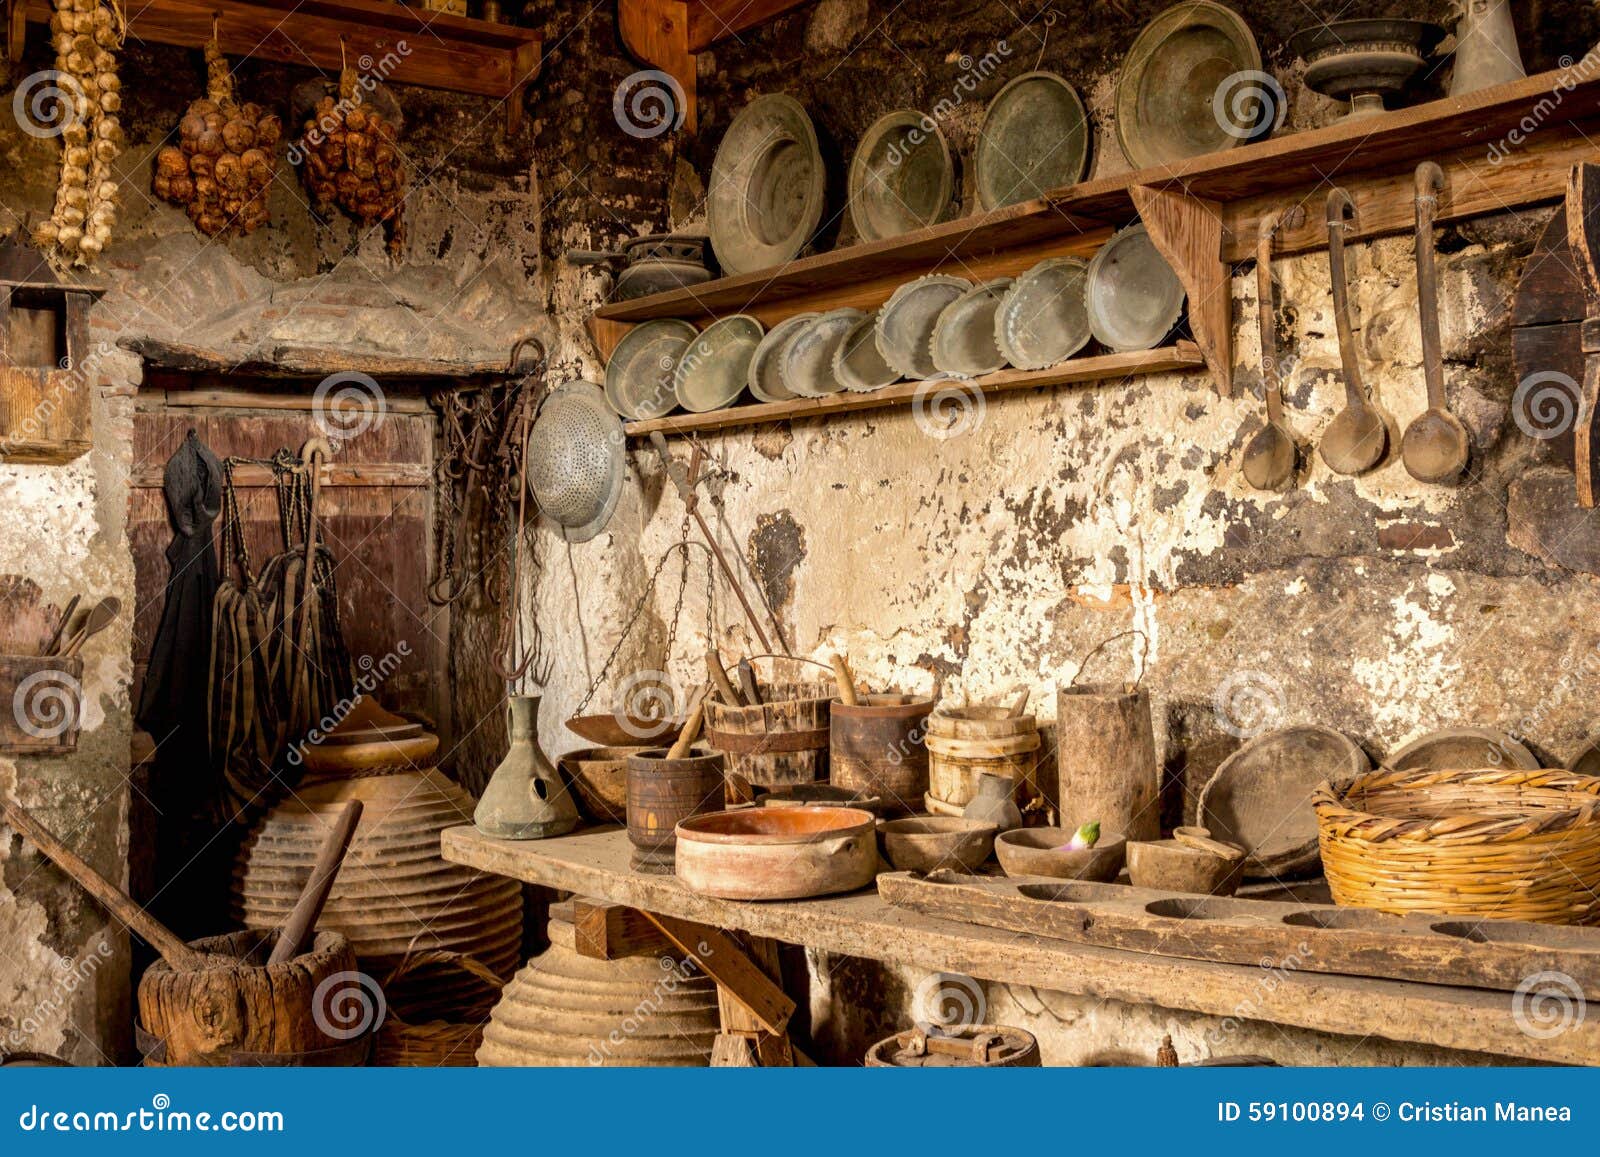 Old country house interior stock photo. Image of europe   20